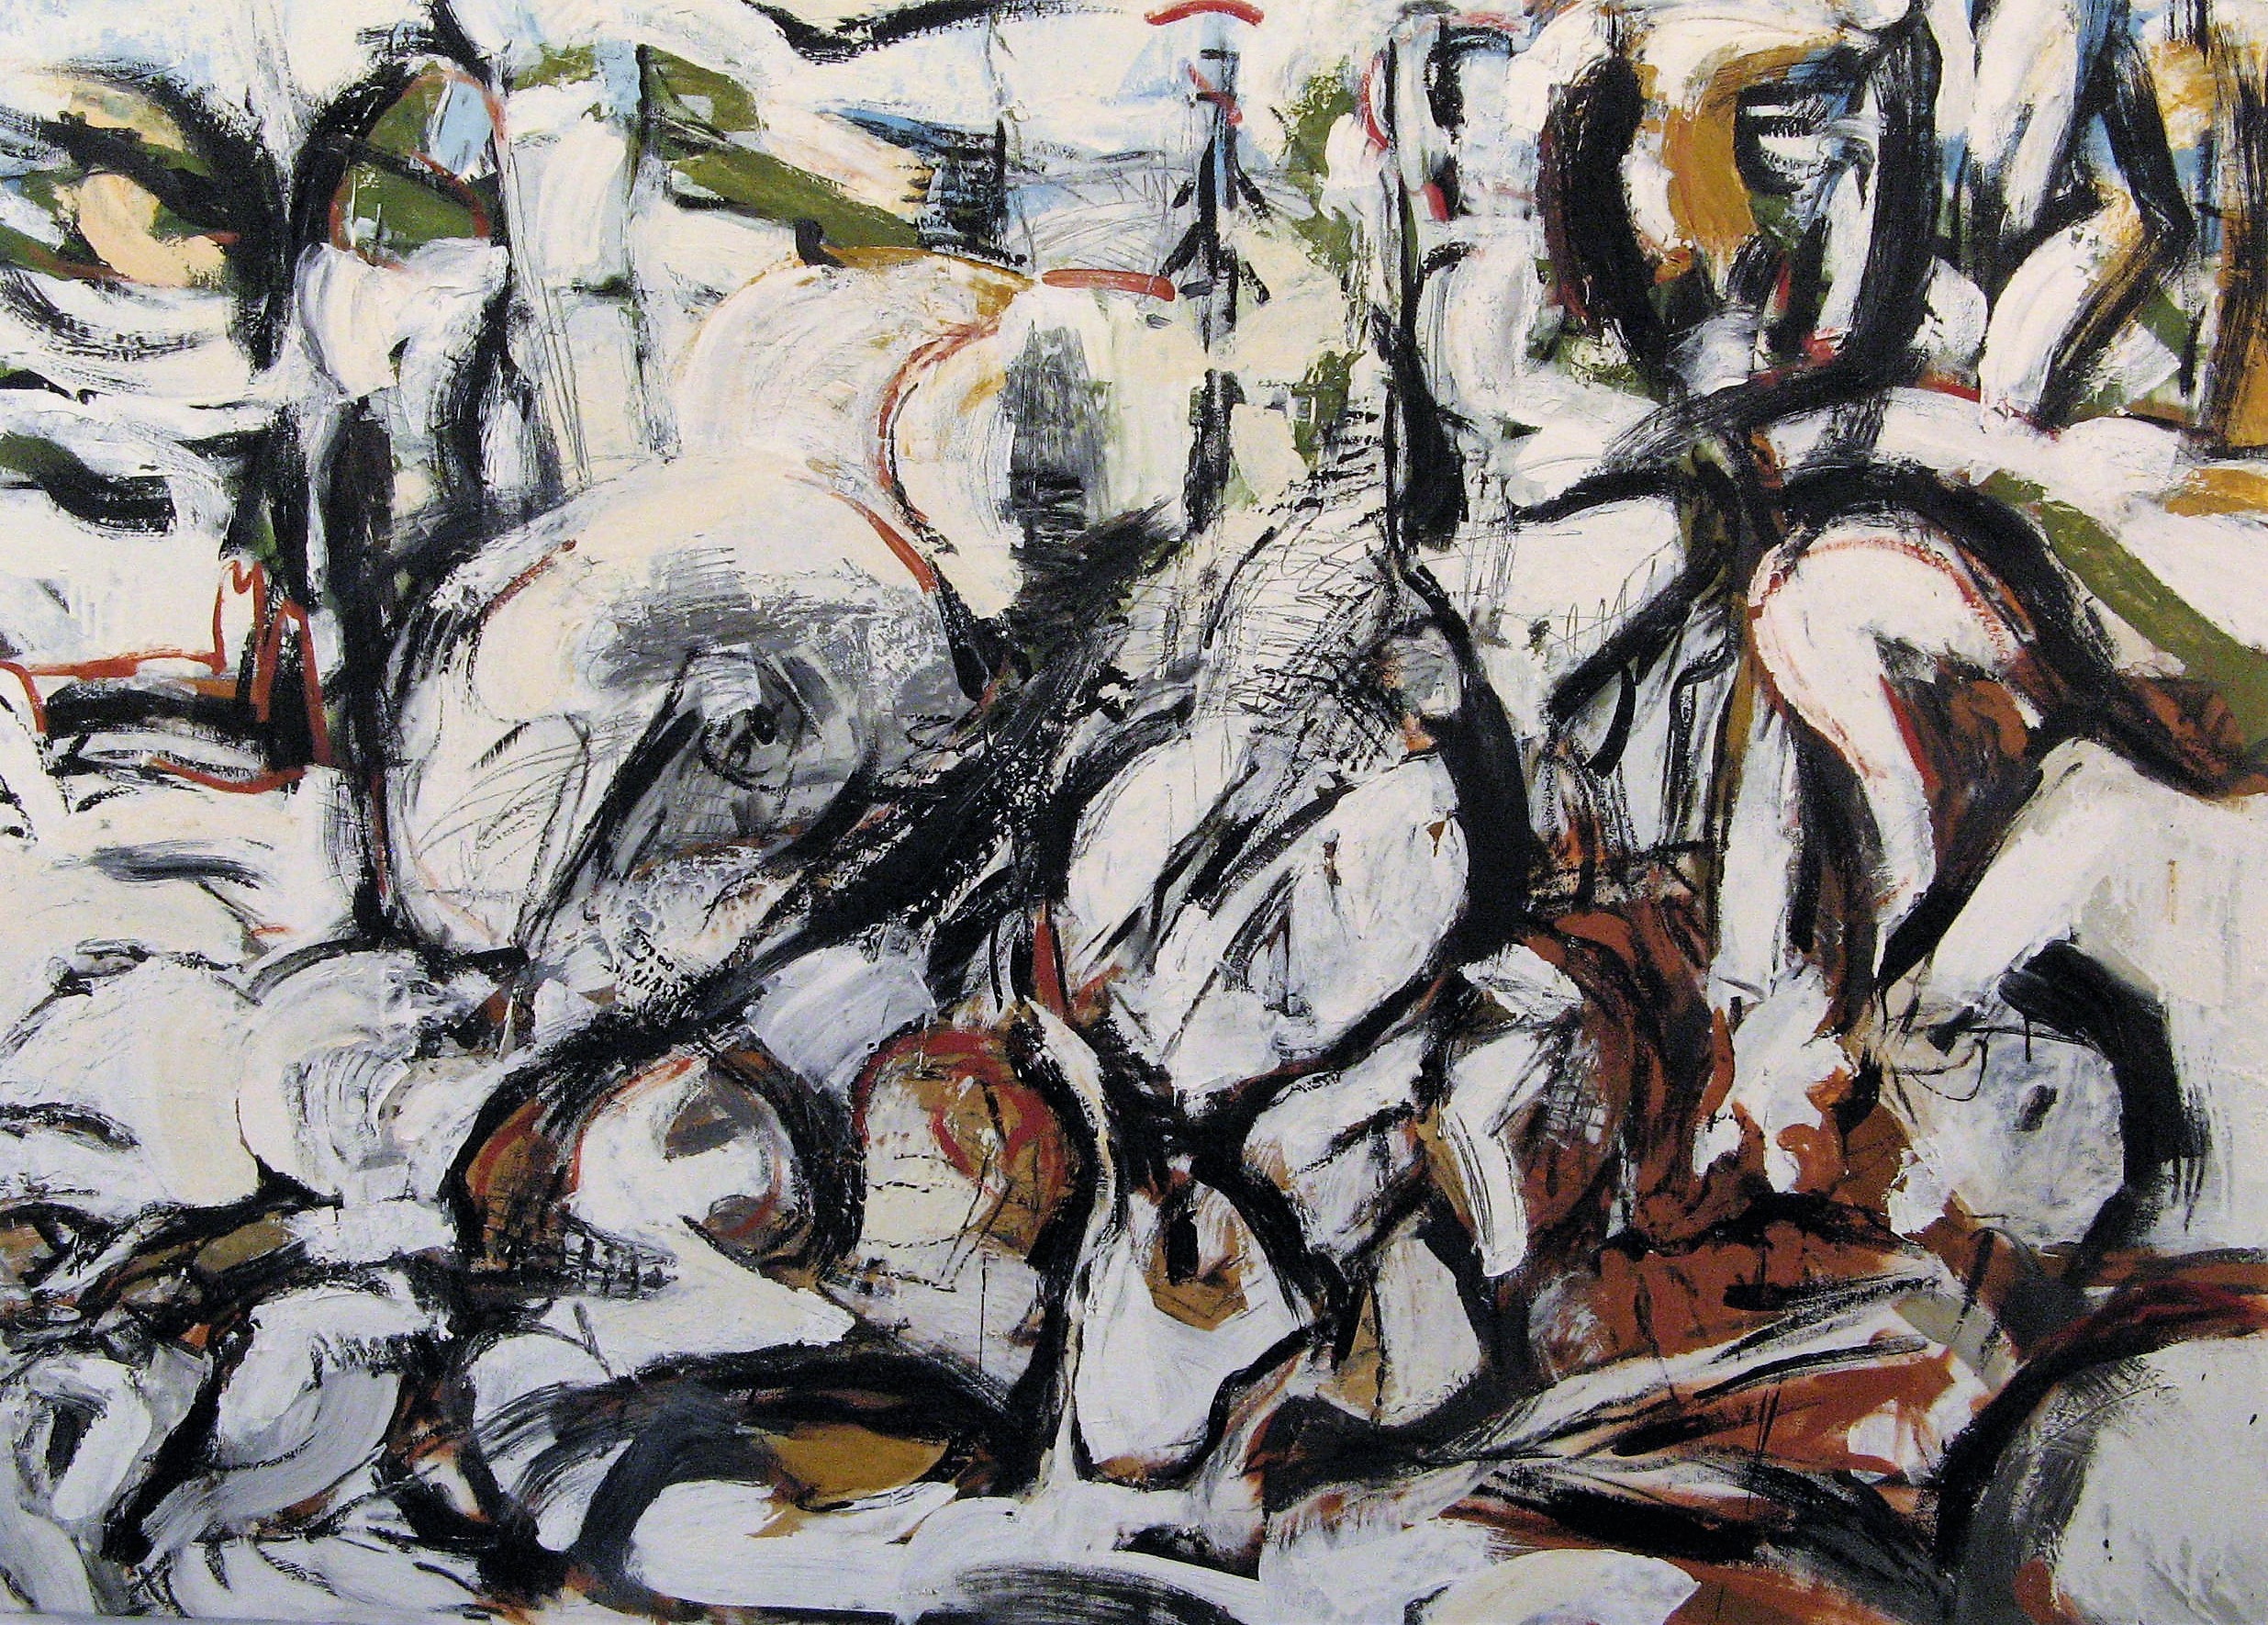   Sticks and Stones 2 , Oil and encaustic on canvas, 36x50 